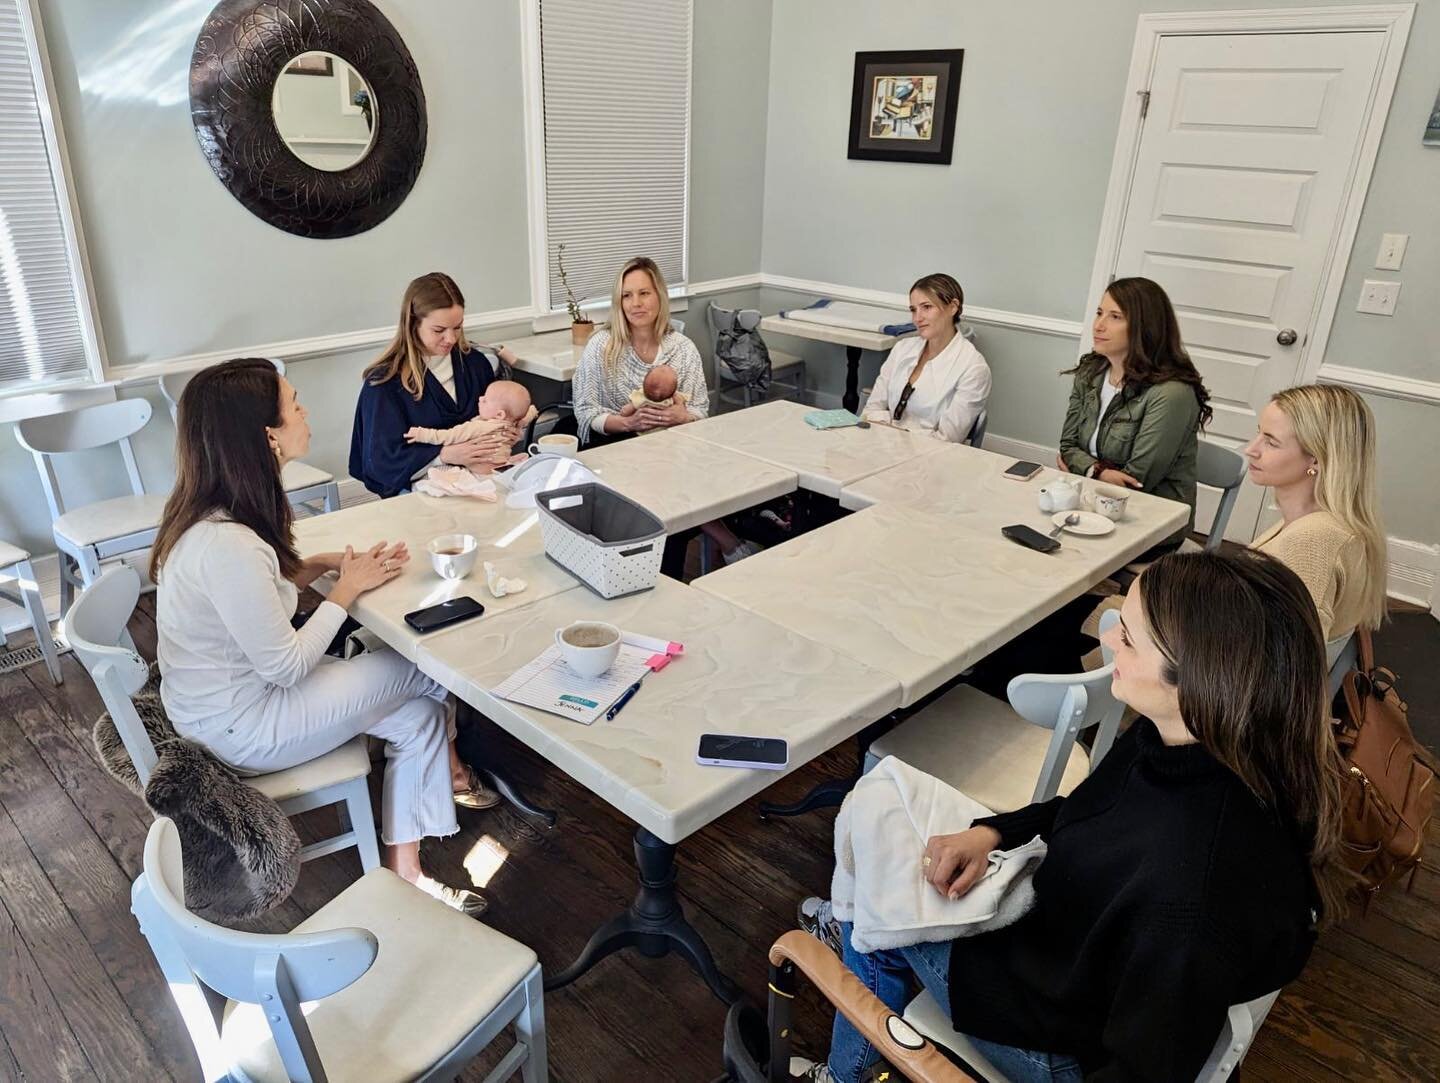 Charleston March group circled up for their last gathering&hellip;if you just had a baby in the last 2 months, sign up for the May circle led by postpartum doula @jennadoula and hosted at @galadesserts with specialist visits from @nurture_nourish_ser